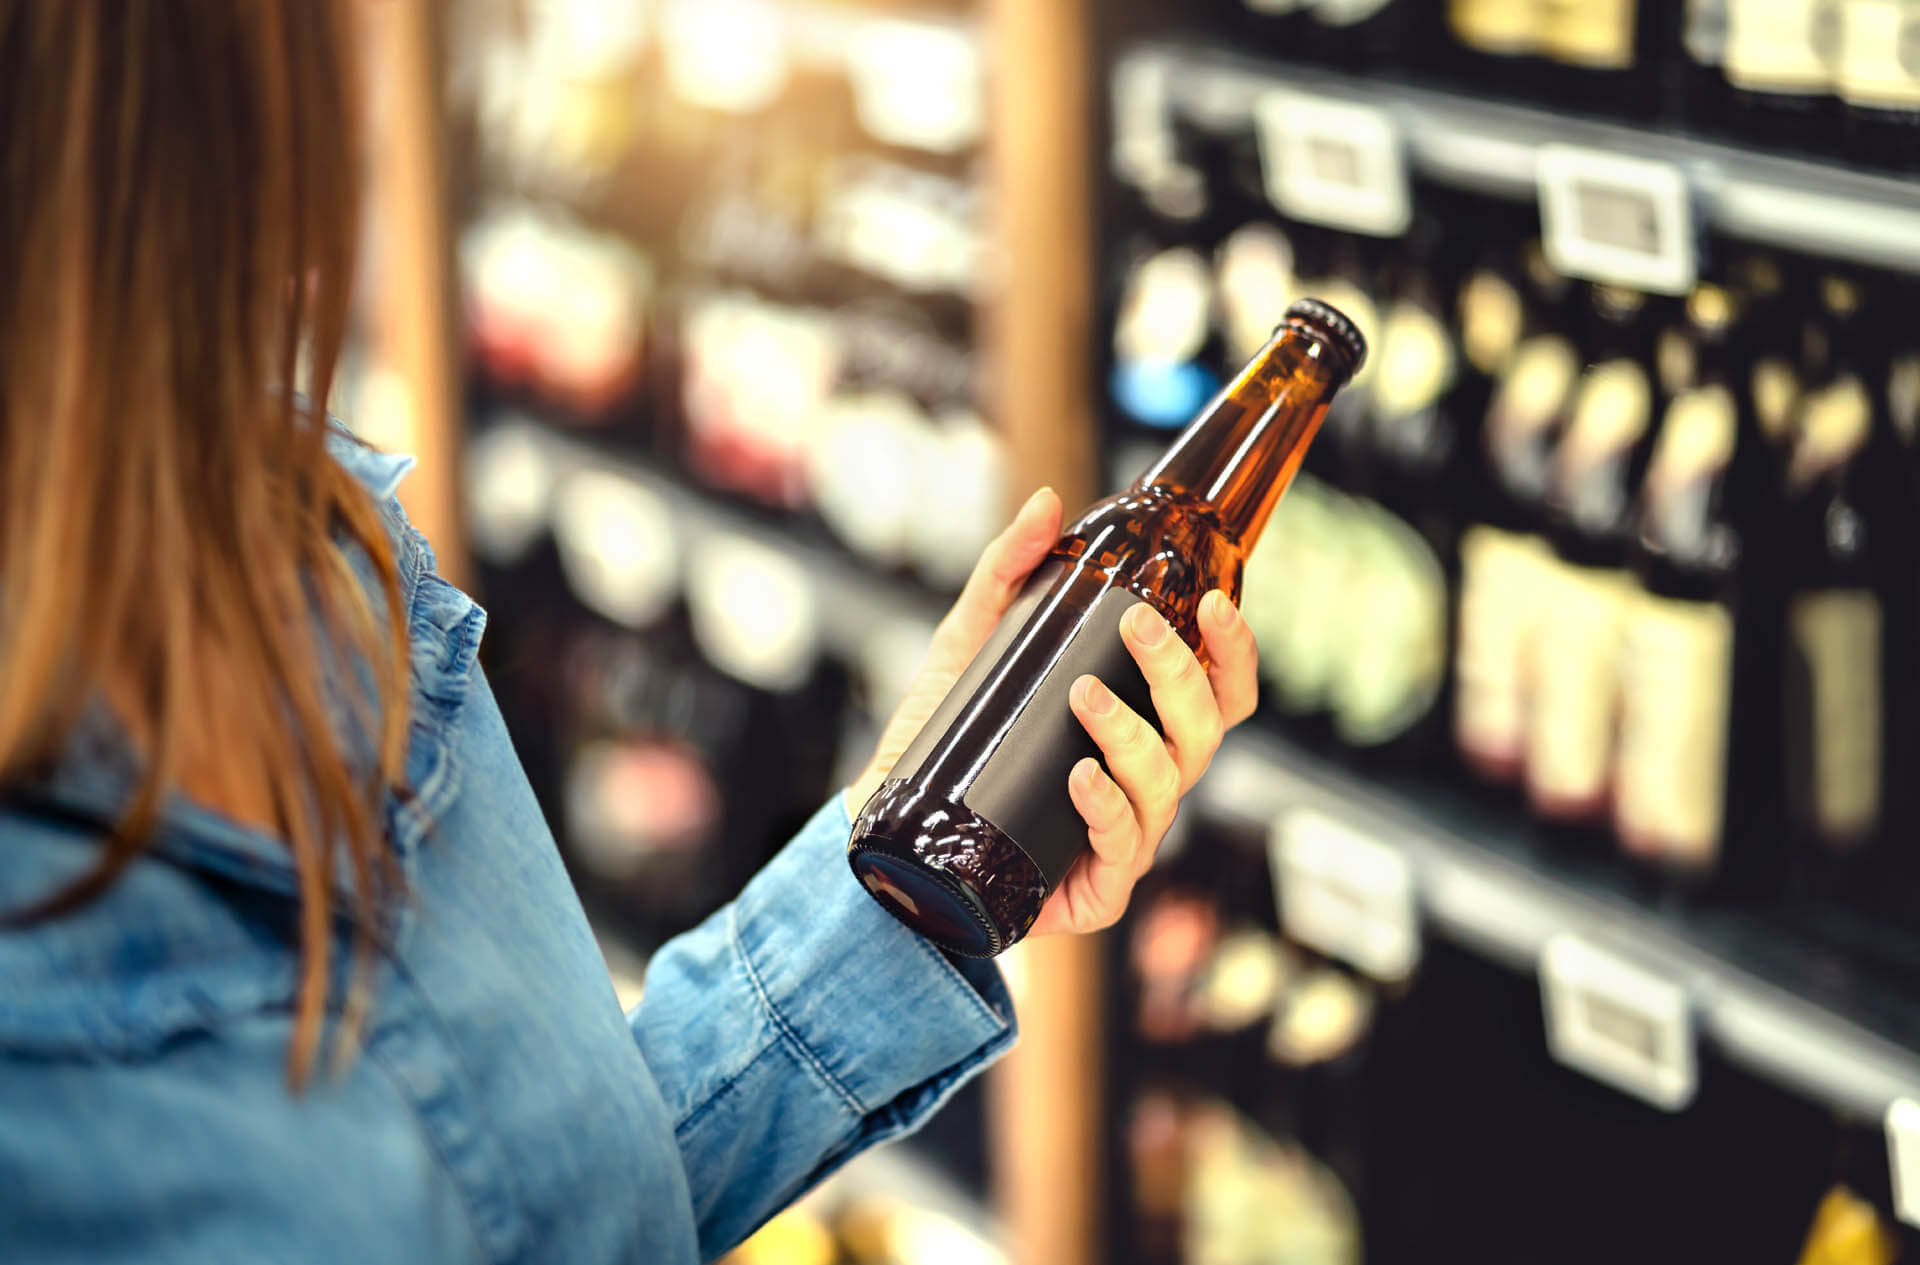 Woman in shop reading beer label